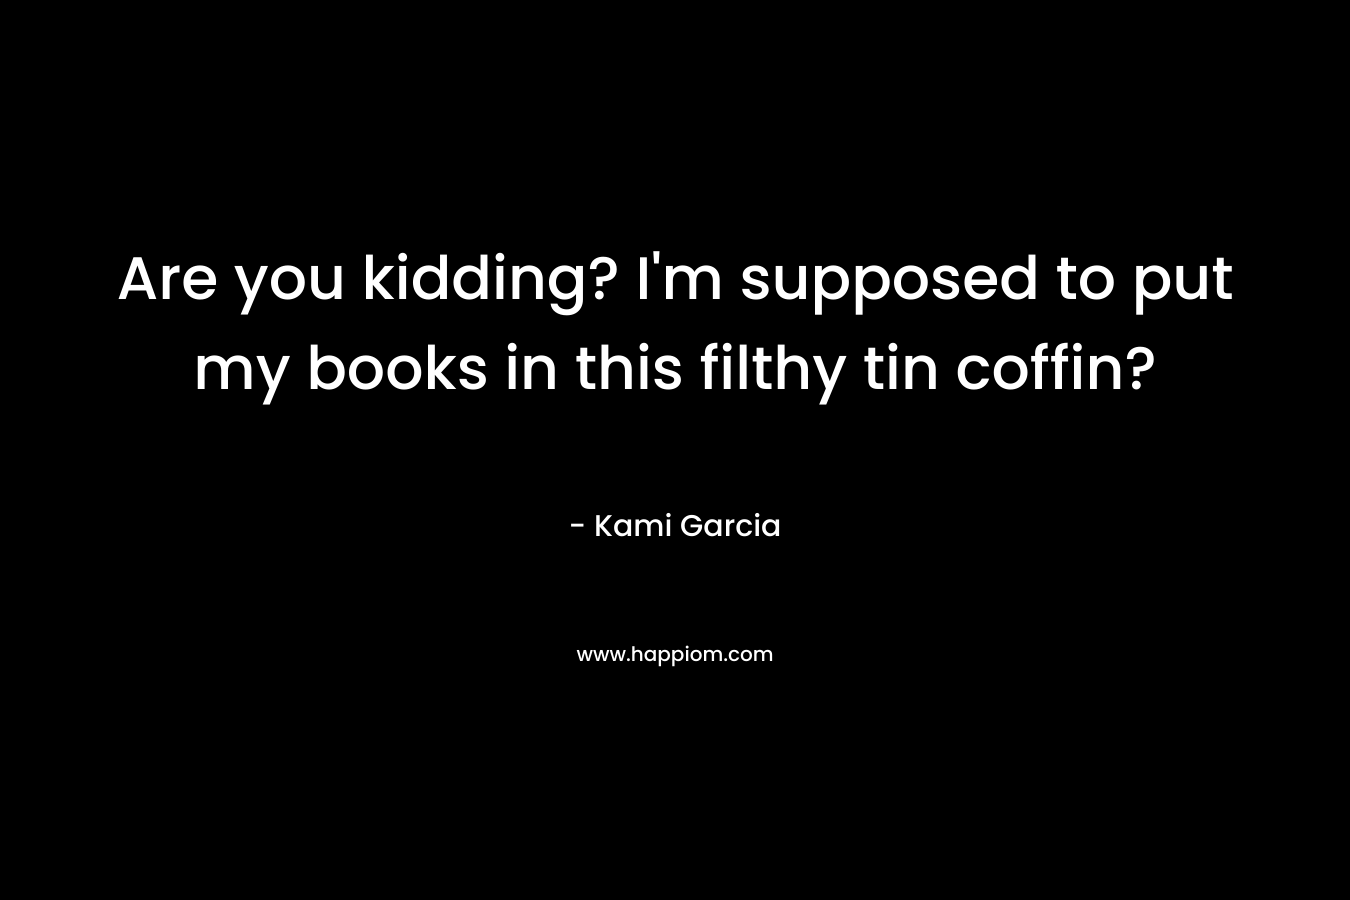 Are you kidding? I’m supposed to put my books in this filthy tin coffin? – Kami Garcia